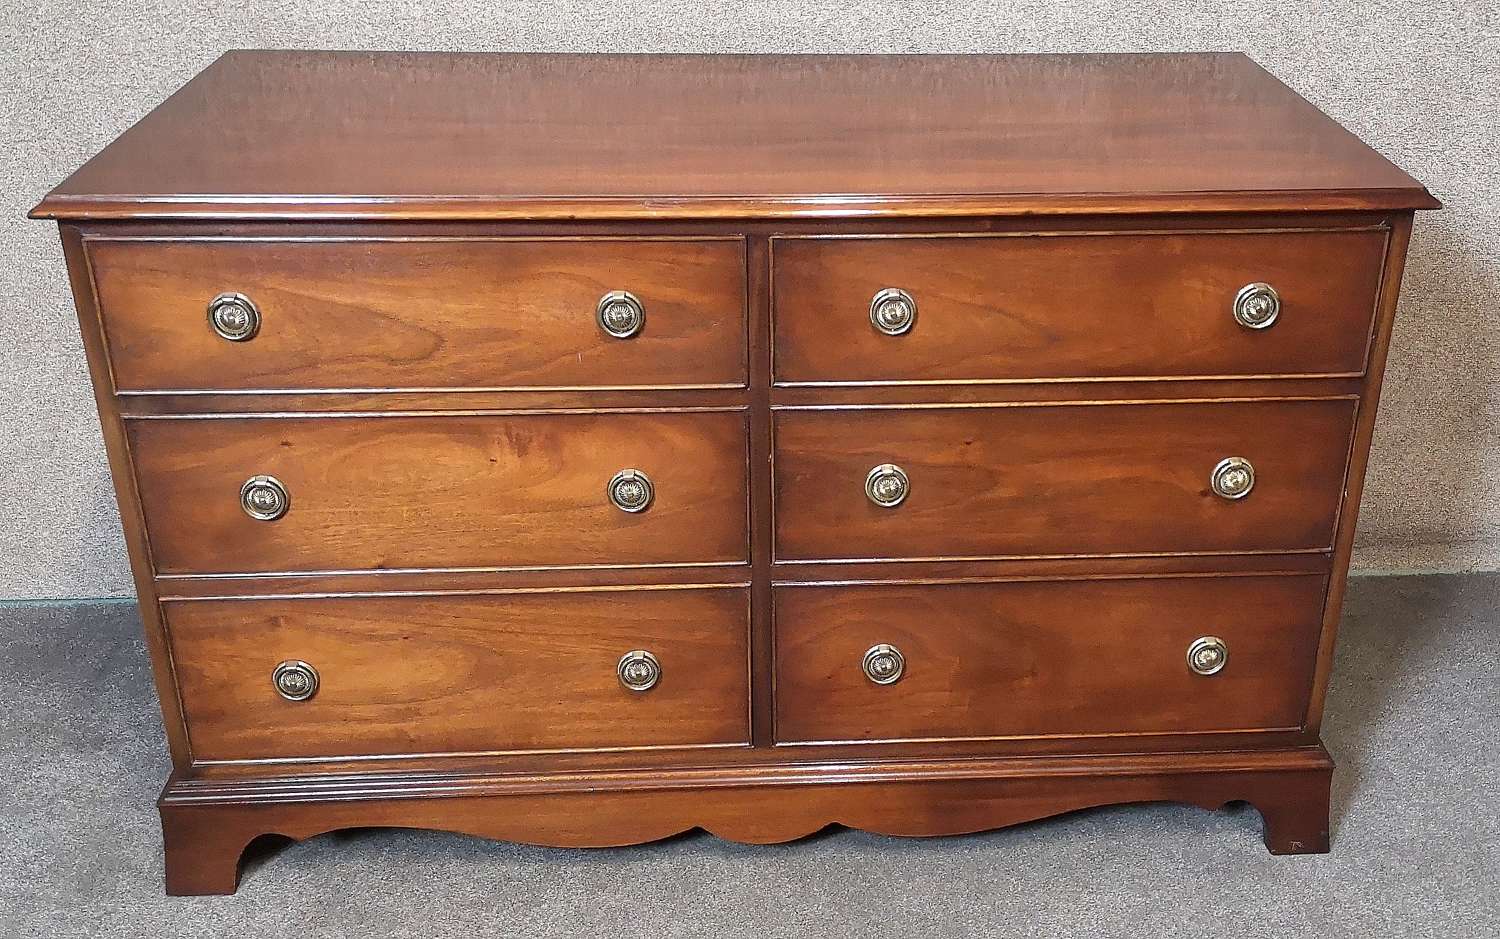 A Reprodux Bevan Funnell Figured Mahogany Chest of Drawers